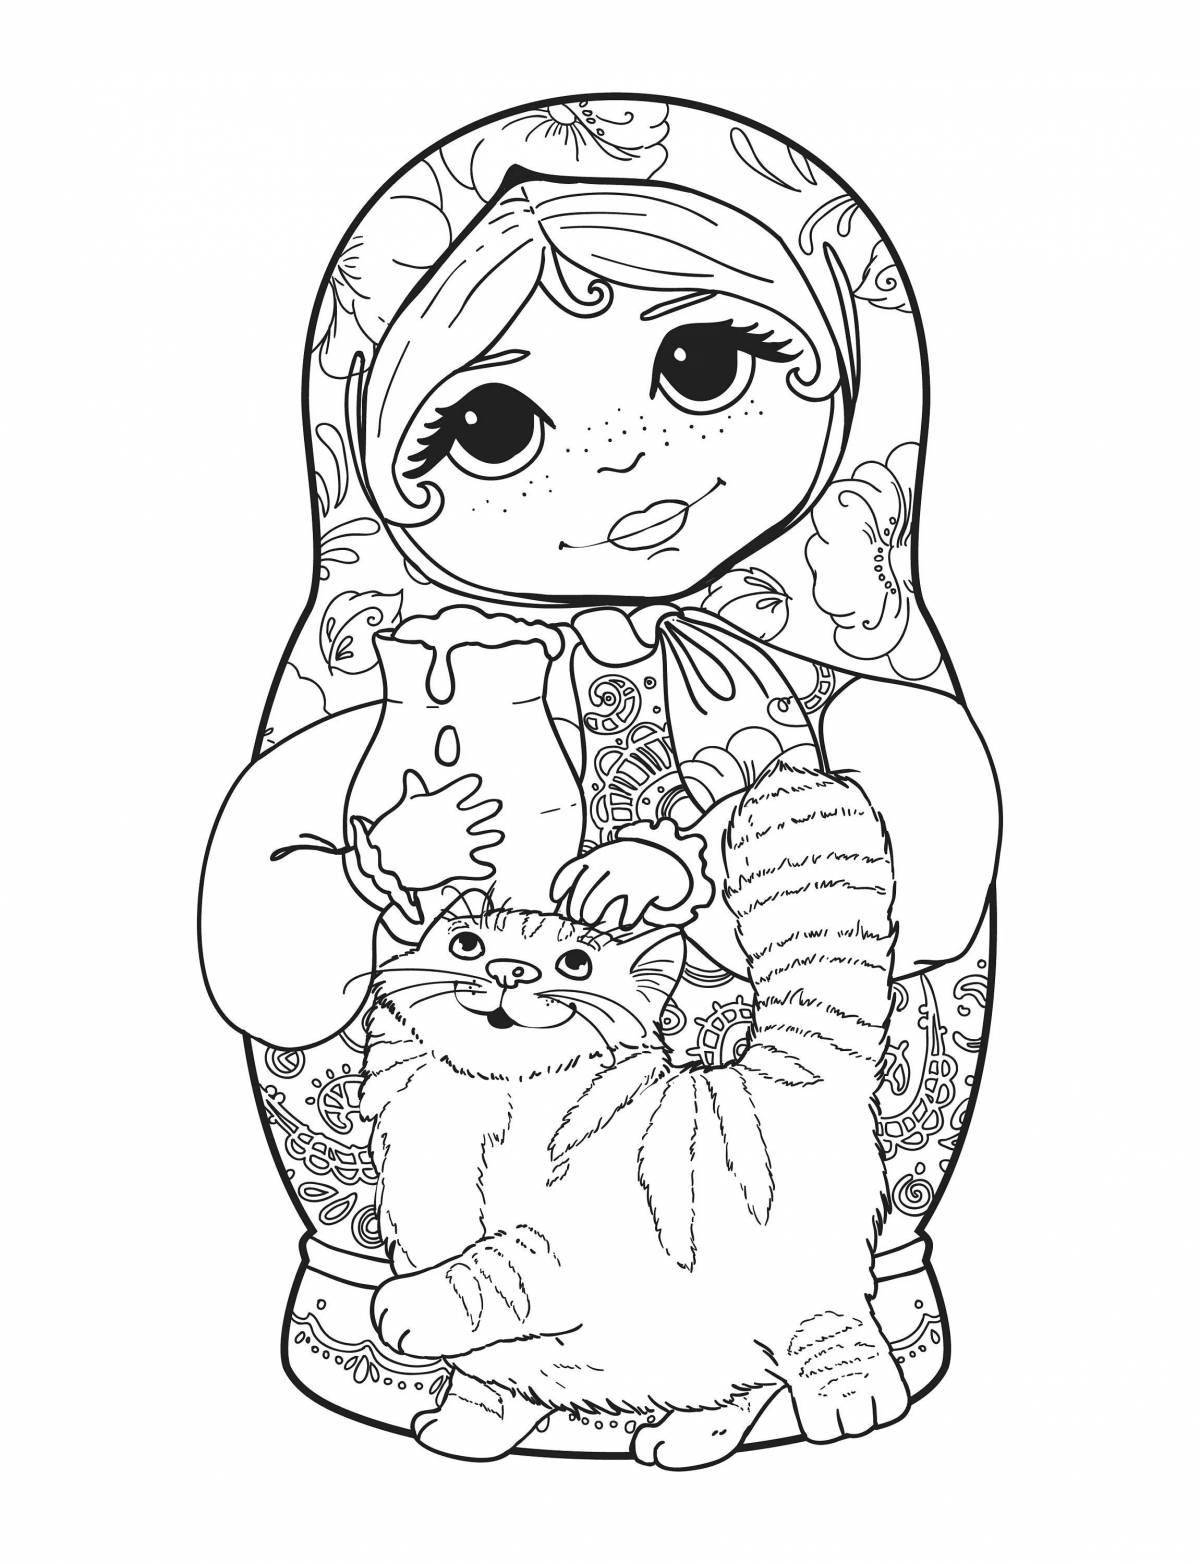 Attractive nesting doll pattern